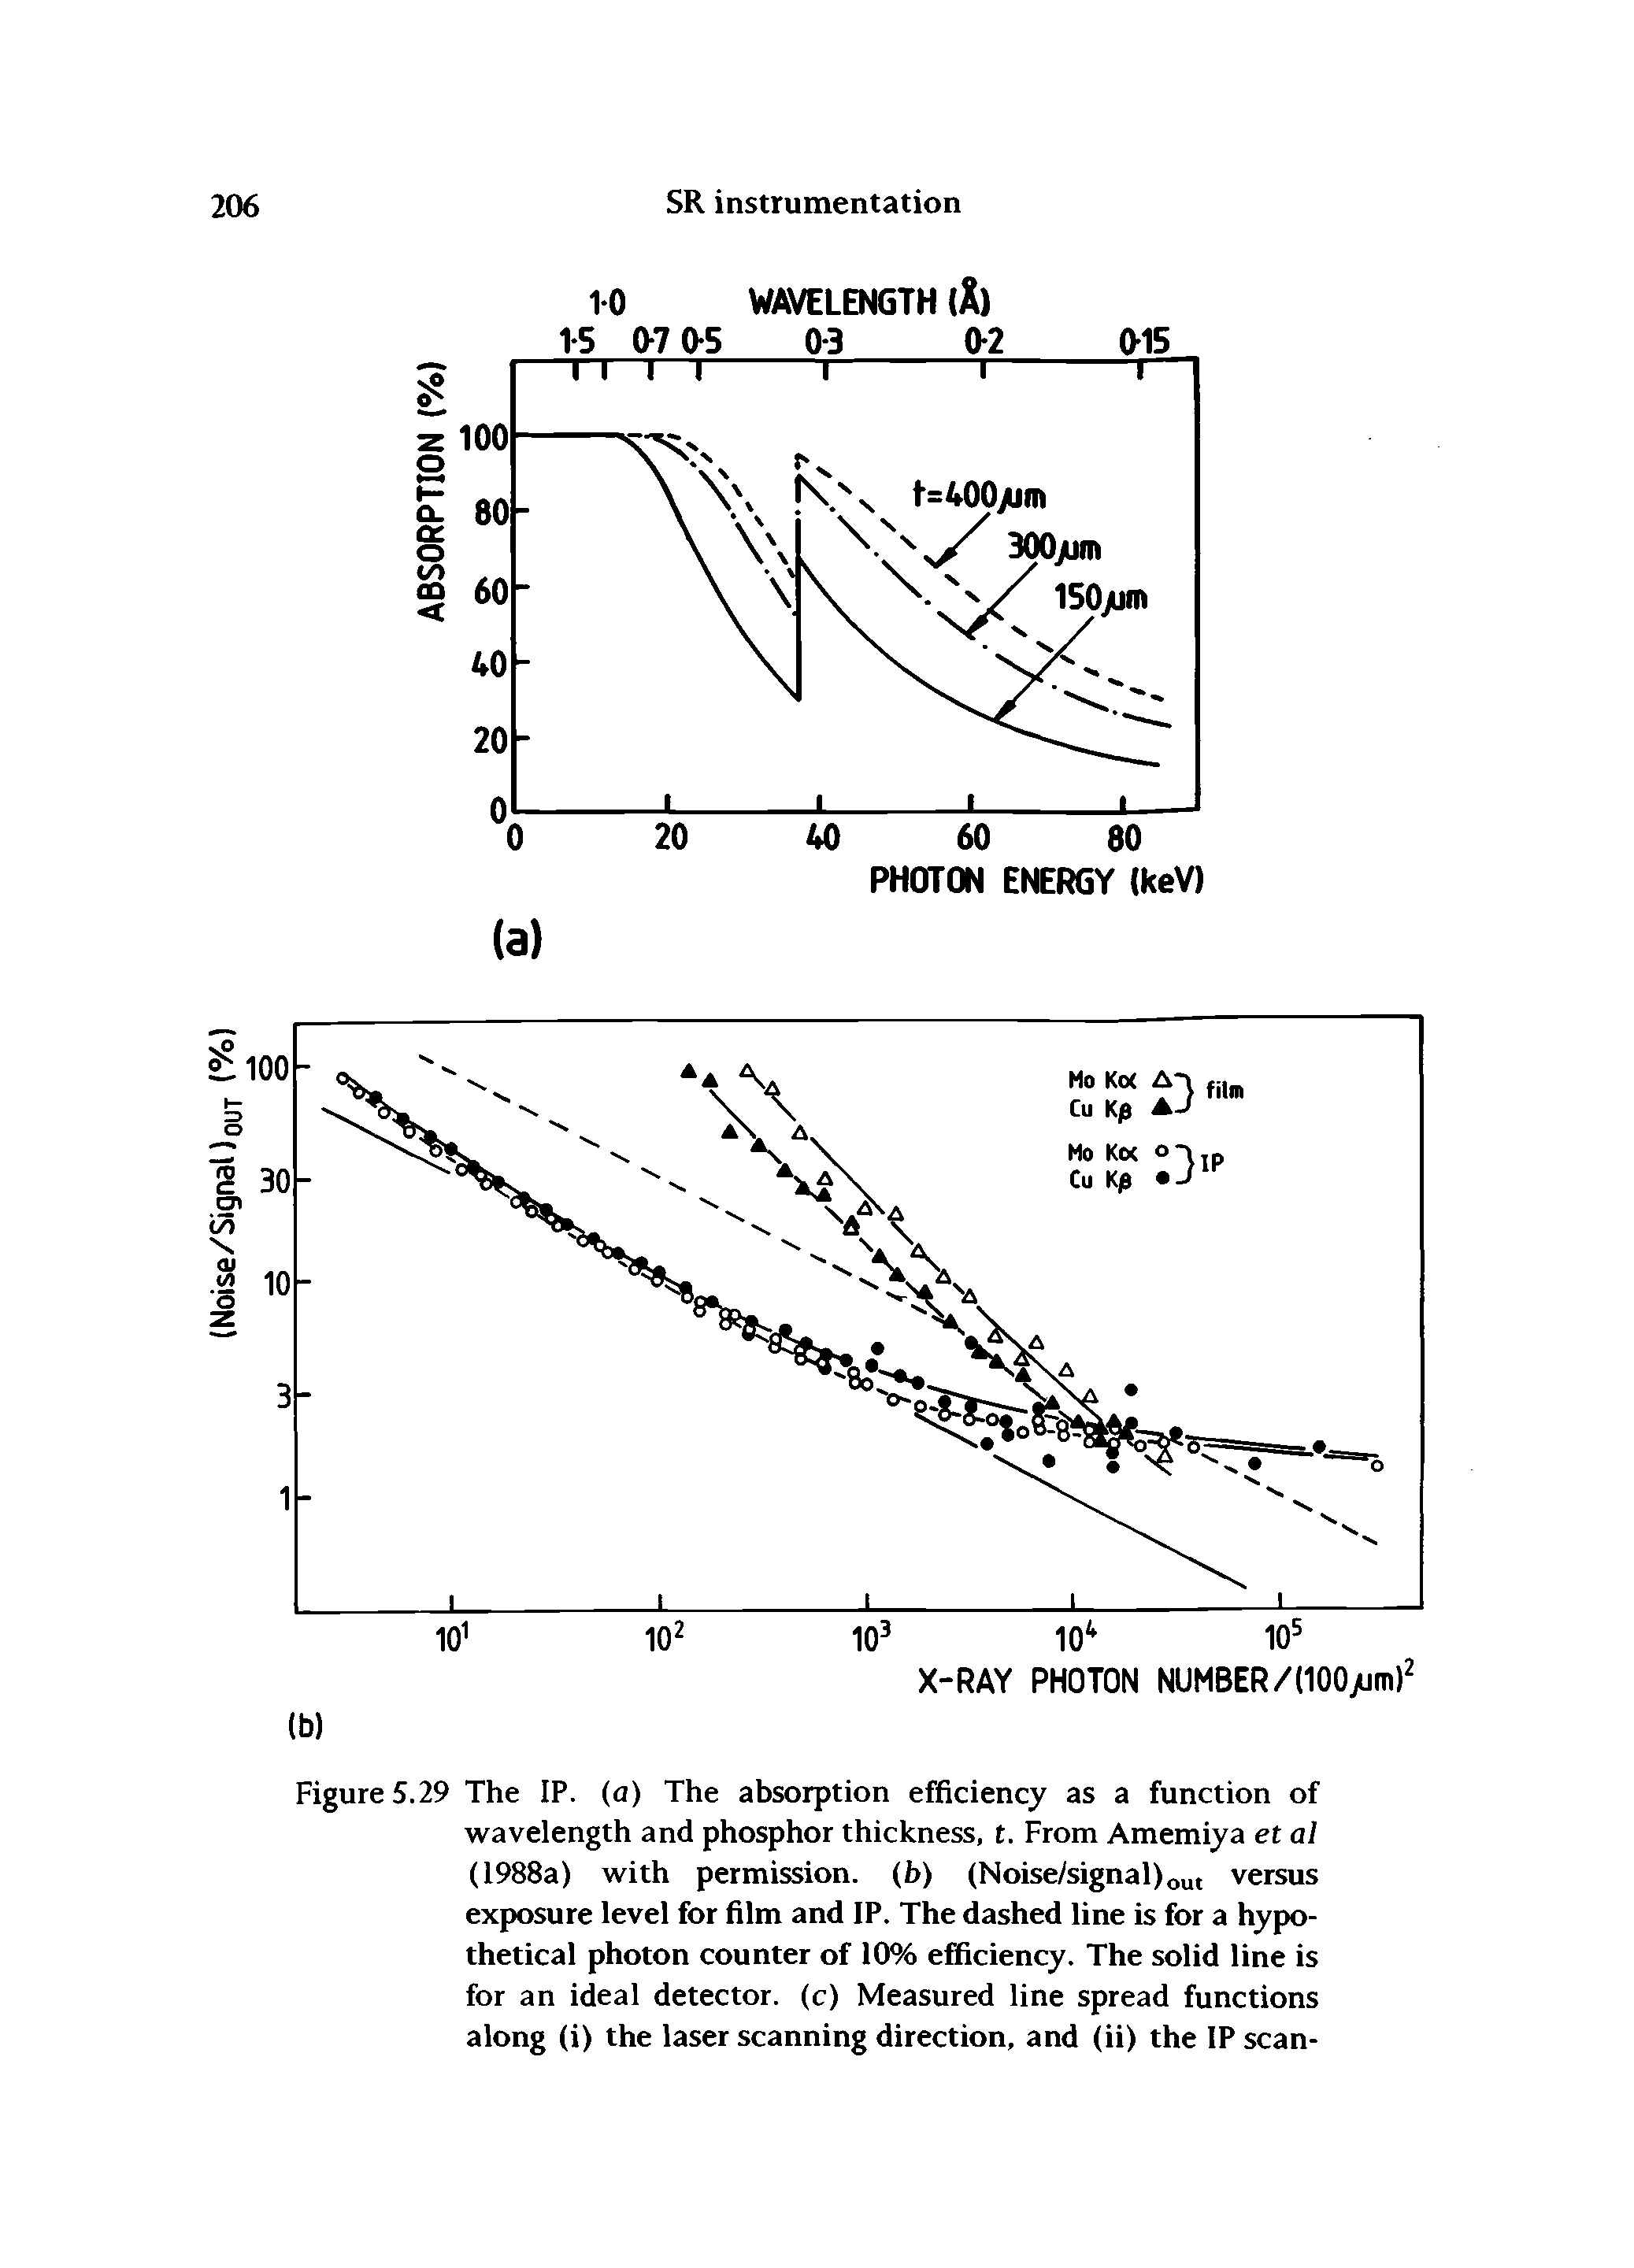 Figure 5.29 The IP. (a) The absorption efficiency as a function of wavelength and phosphor thickness, t. From Amemiya et al (1988a) with permission, (b) (Noise/signal)out versus exposure level for film and IP. The dashed line is for a hypothetical photon counter of 10% efficiency. The solid line is for an ideal detector, (c) Measured line spread functions along (i) the laser scanning direction, and (ii) the IP scan-...